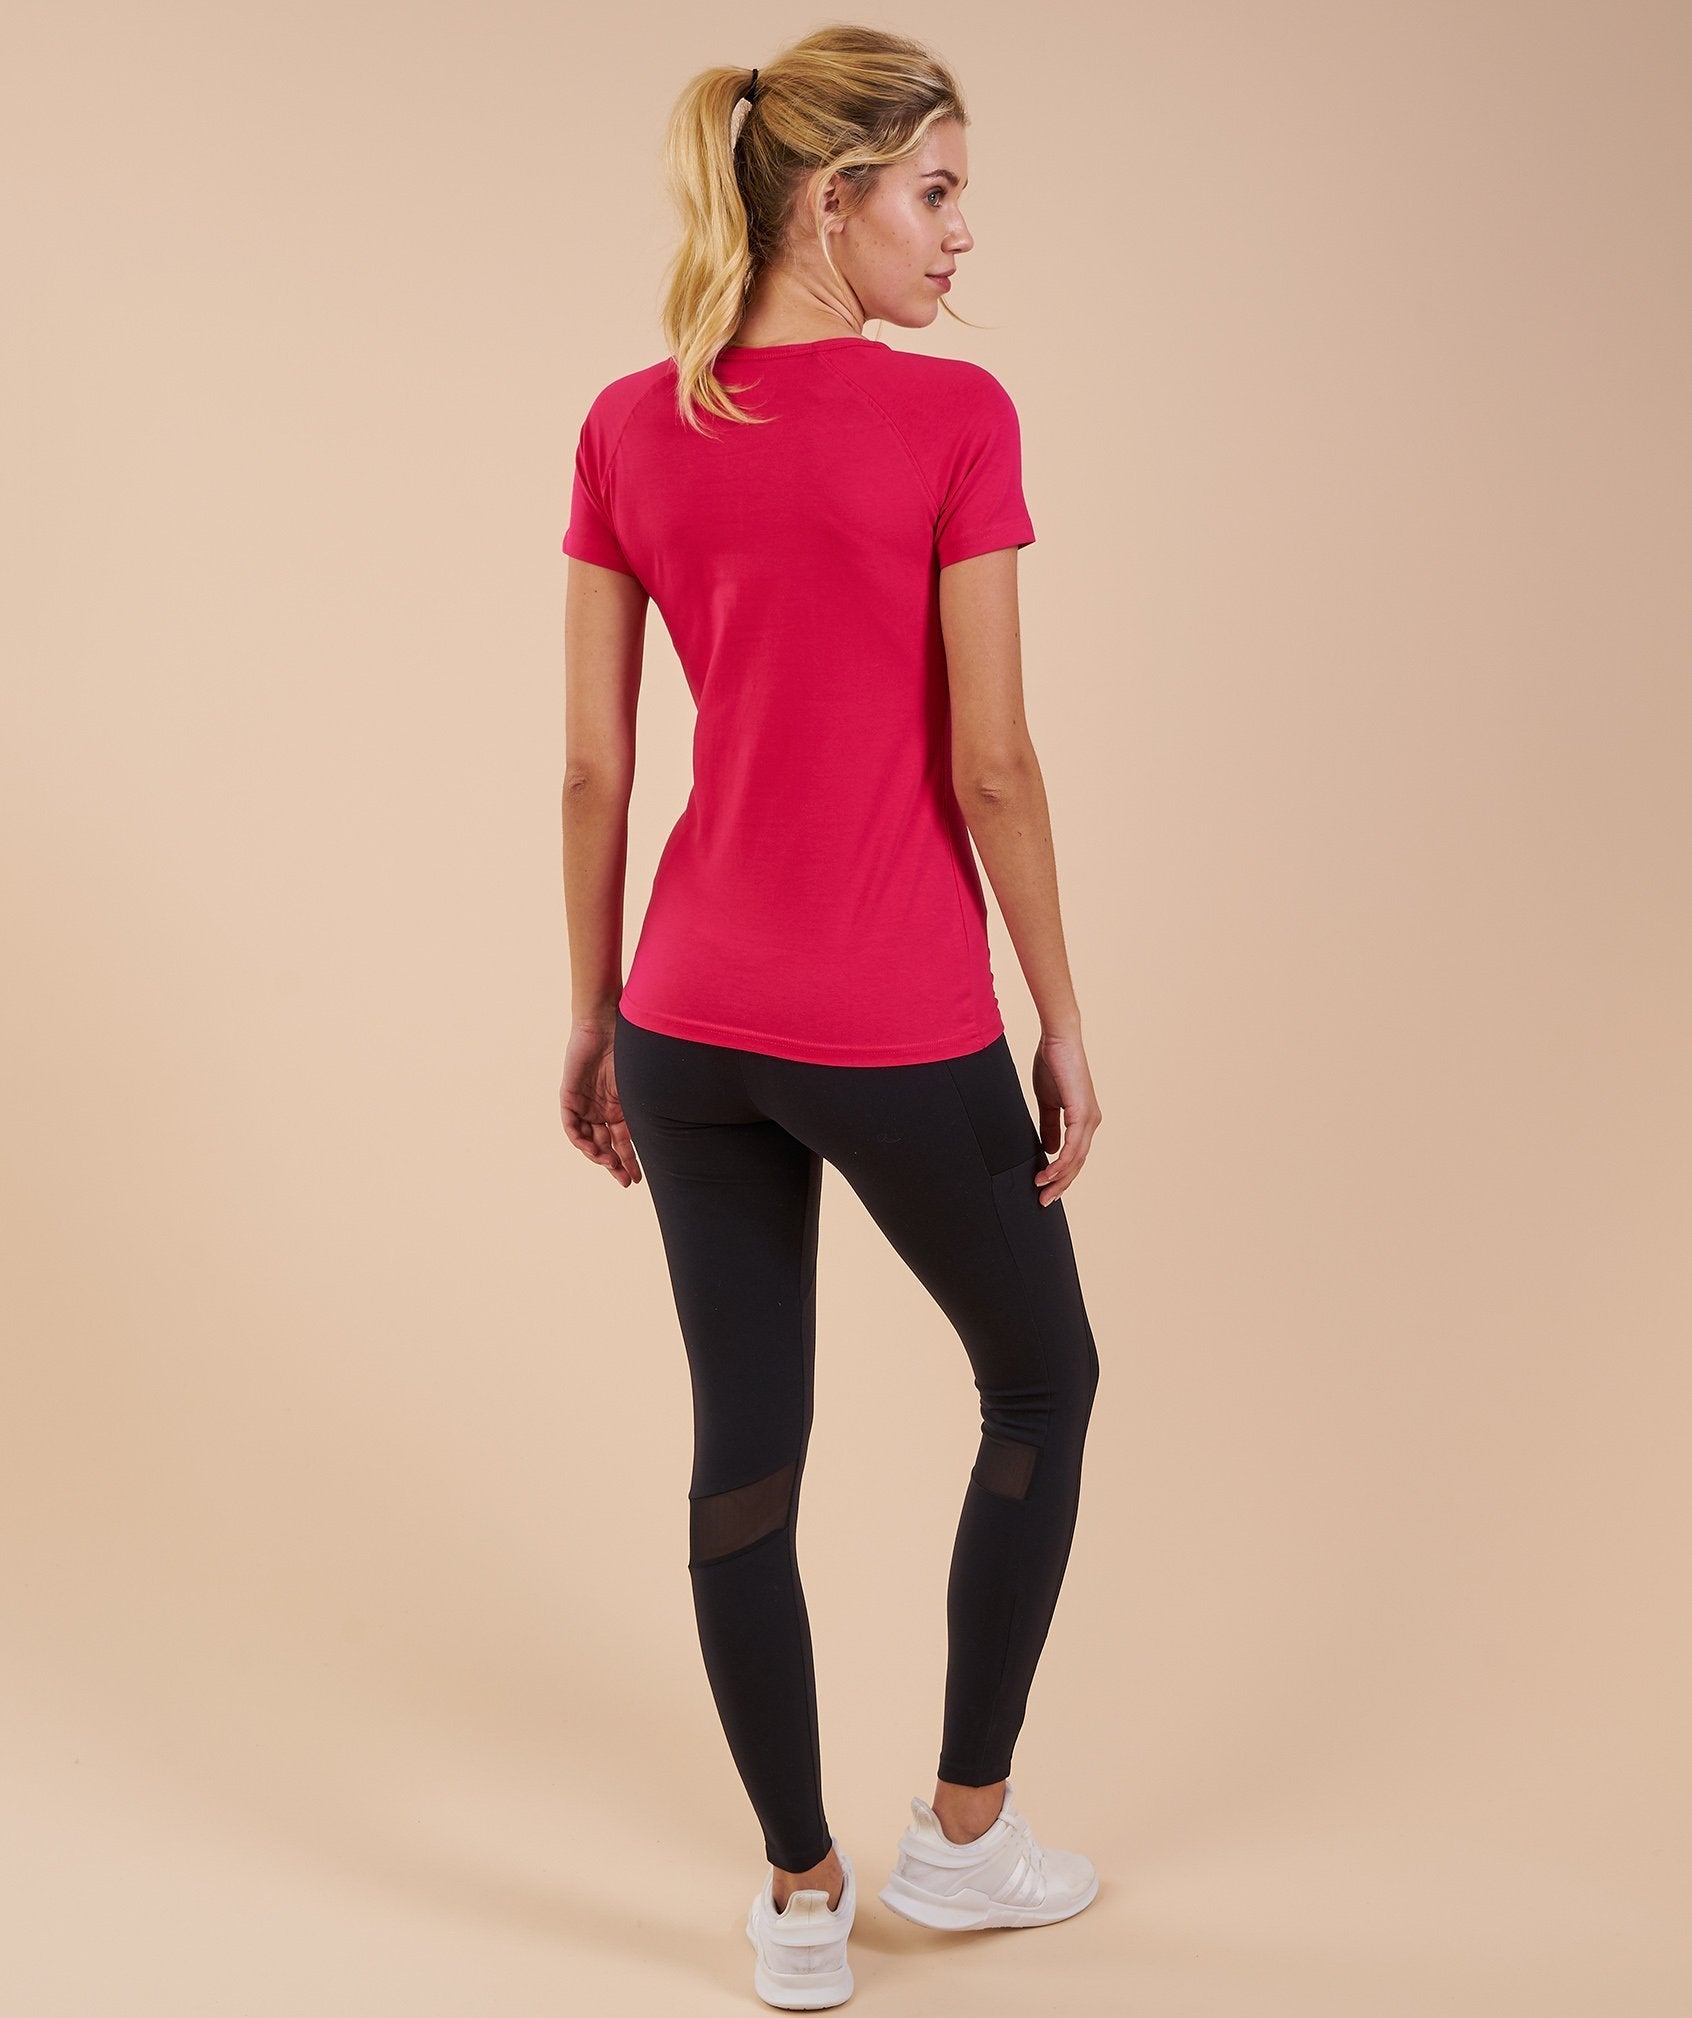 Women's Apollo T-Shirt in Cranberry - view 4